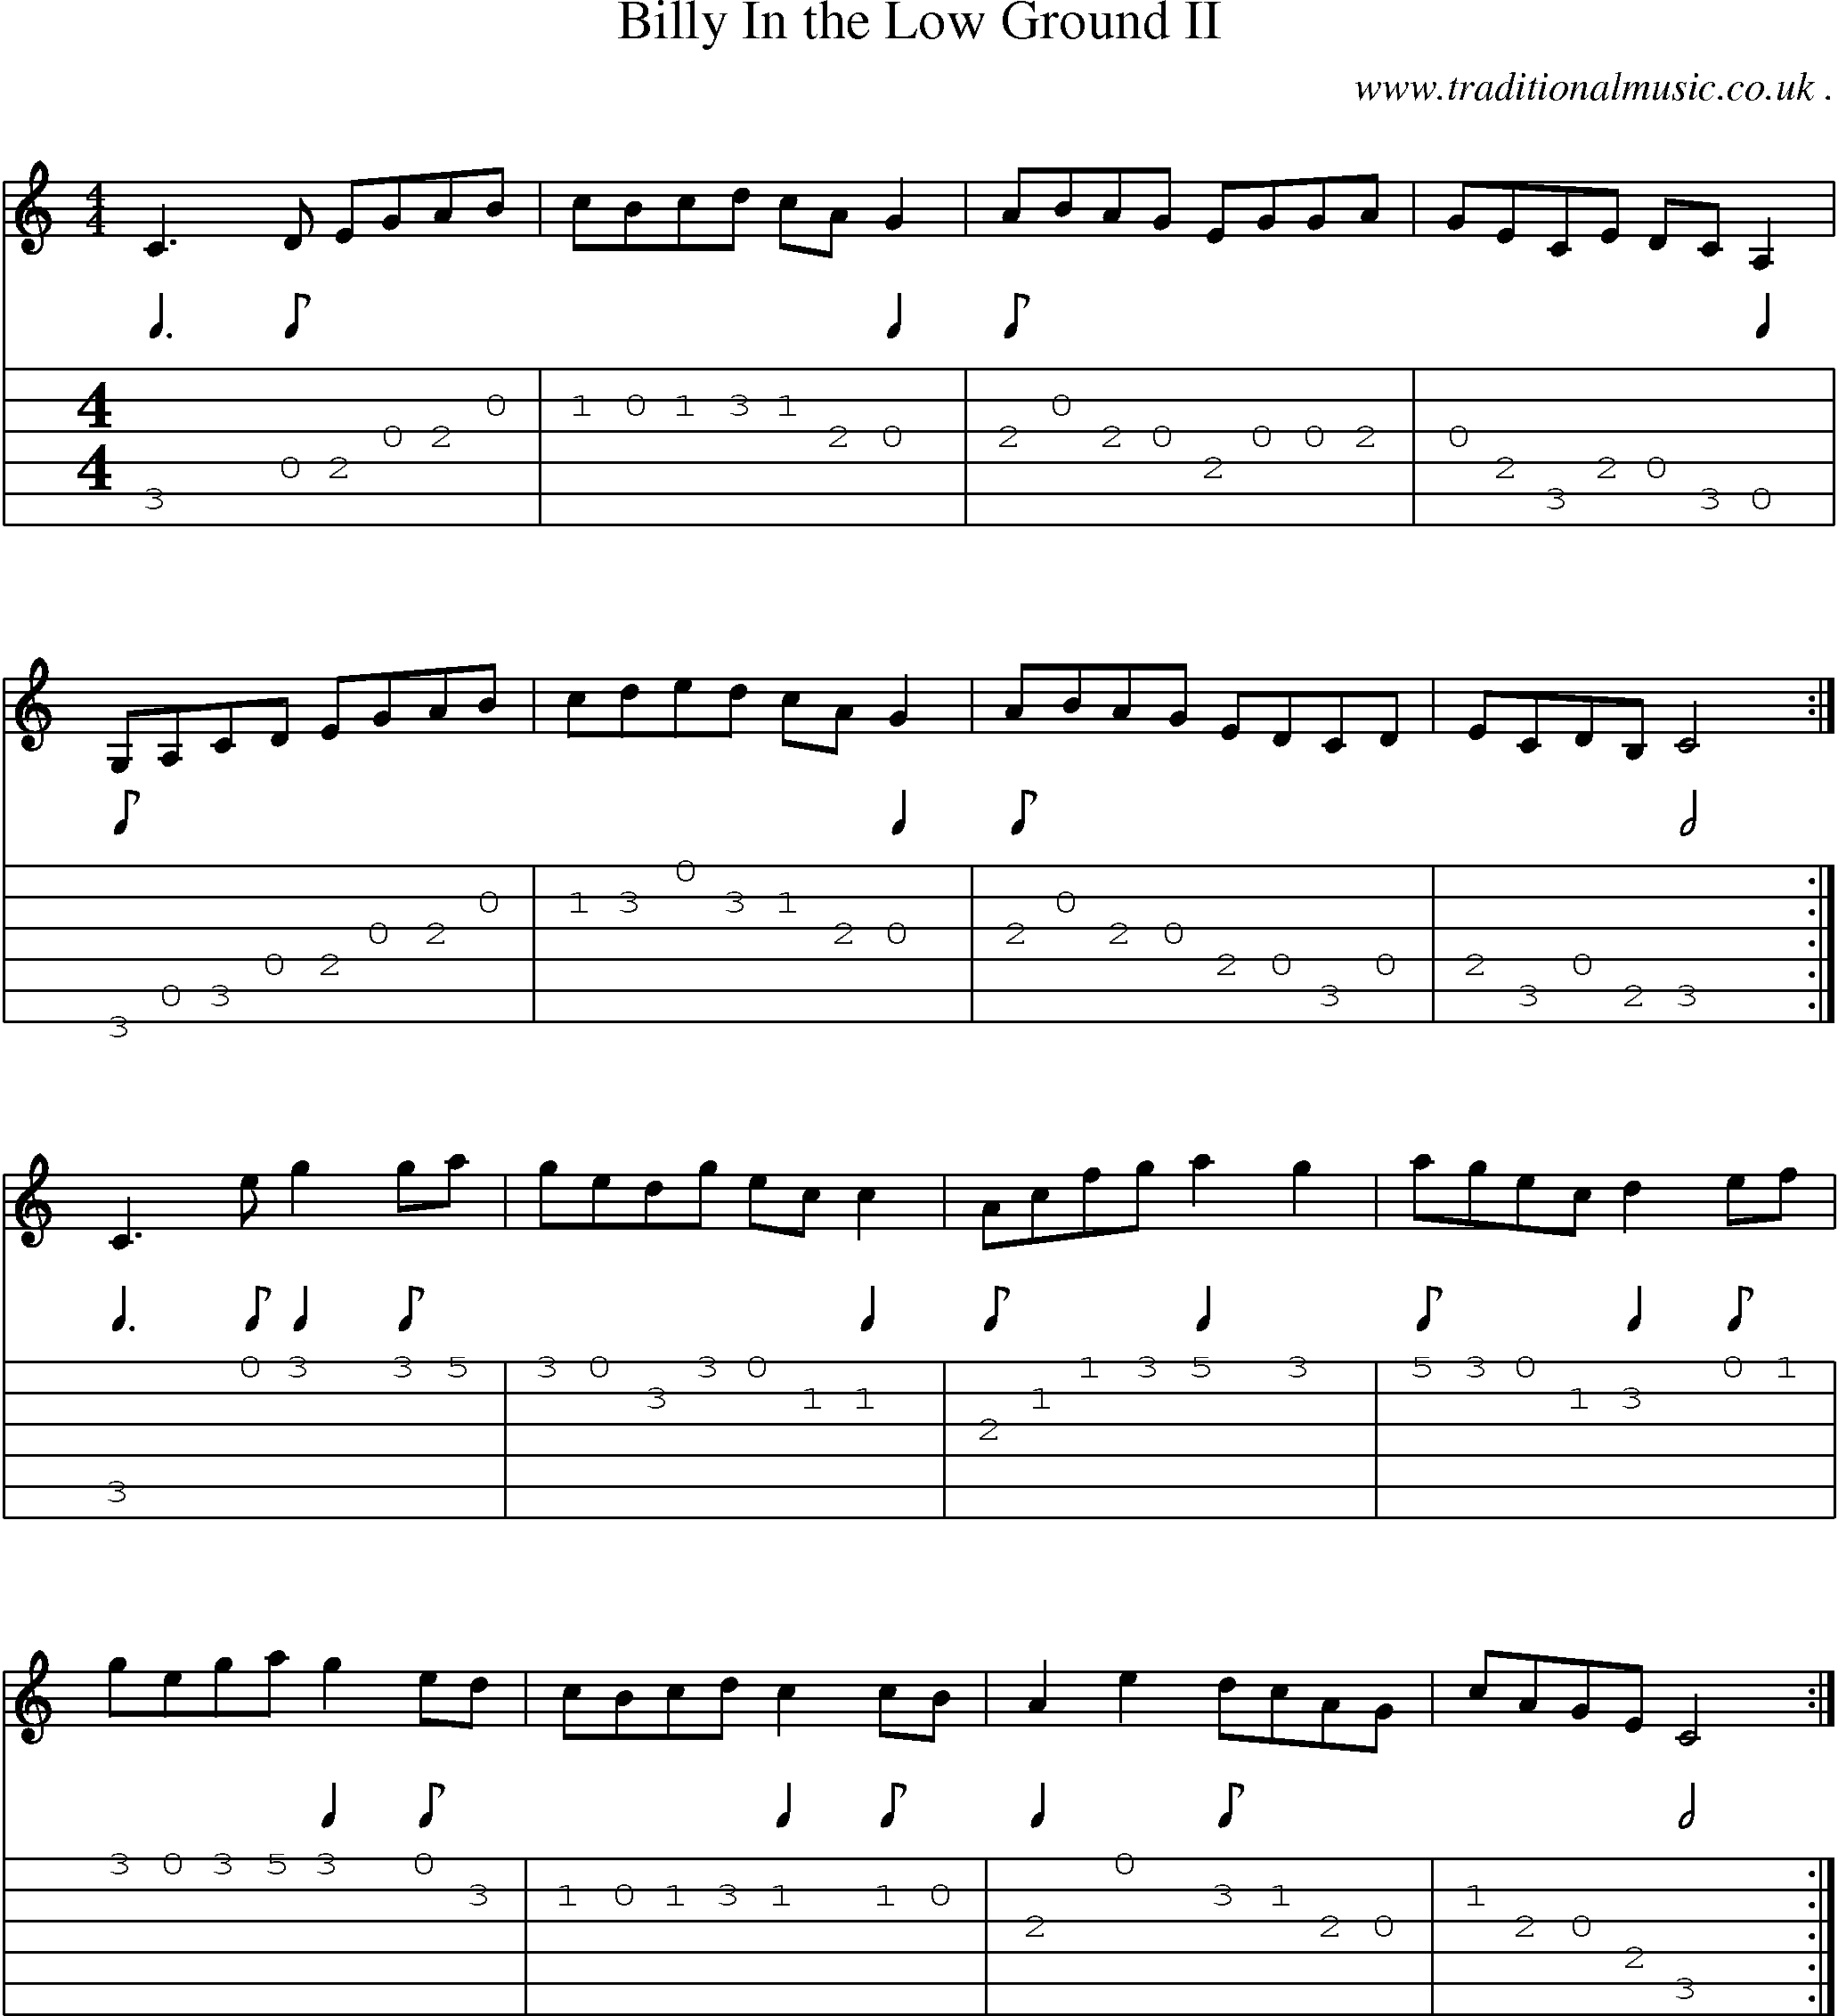 Sheet-music  score, Chords and Guitar Tabs for Billy In The Low Ground Ii